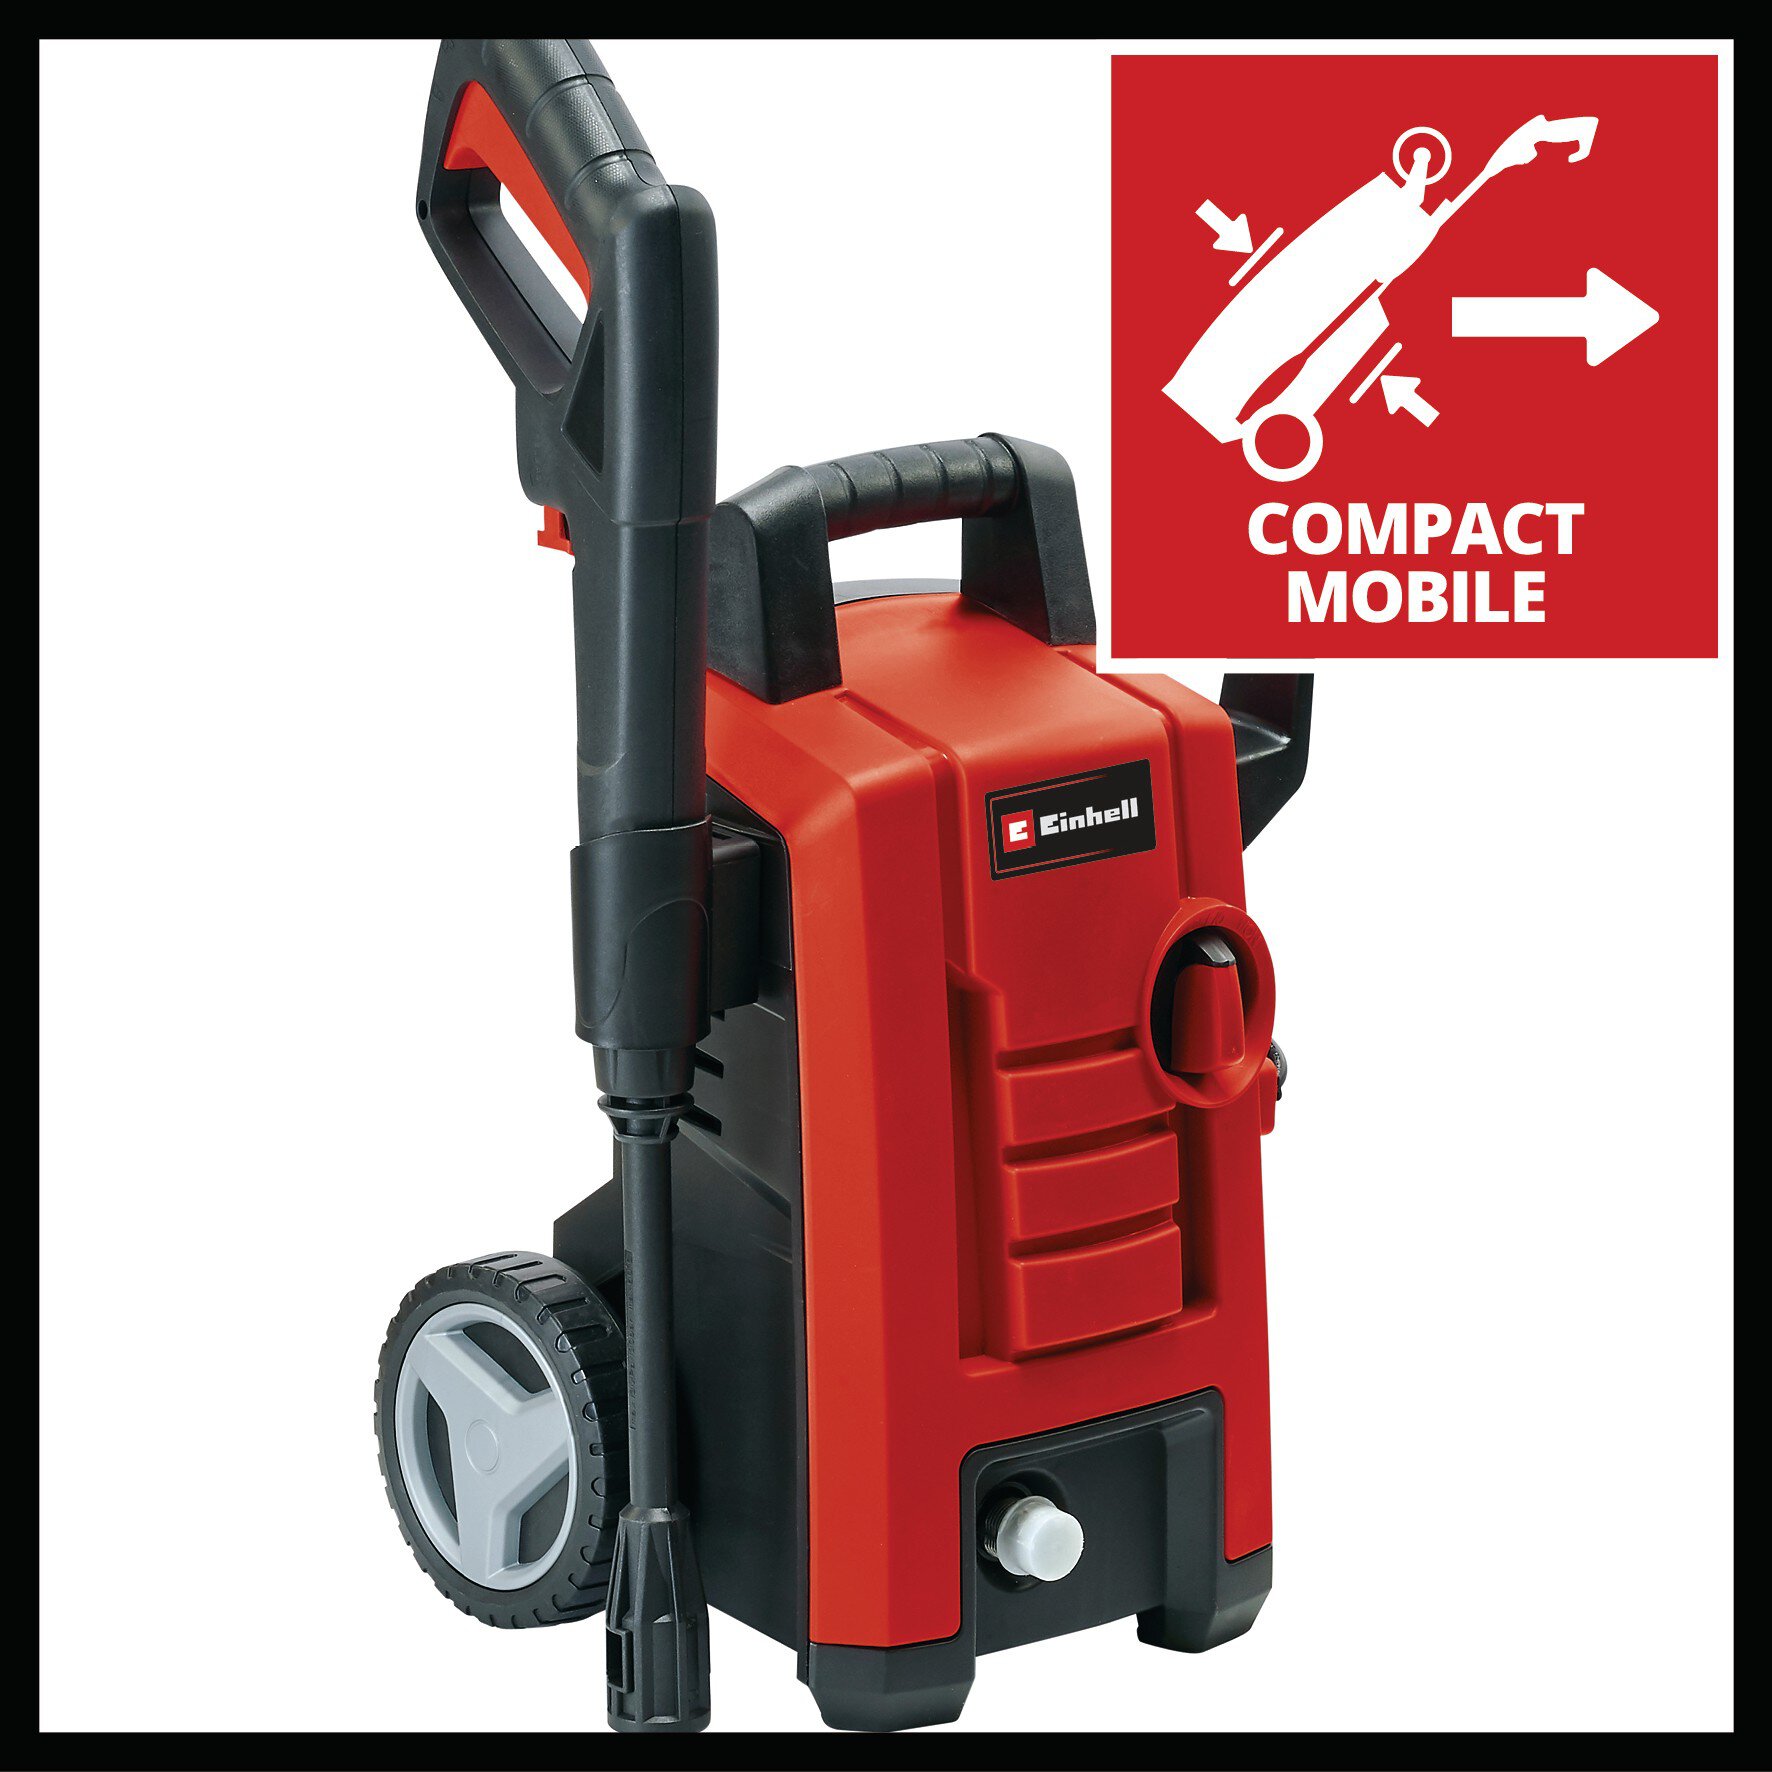 einhell-classic-high-pressure-cleaner-4140750-detail_image-101